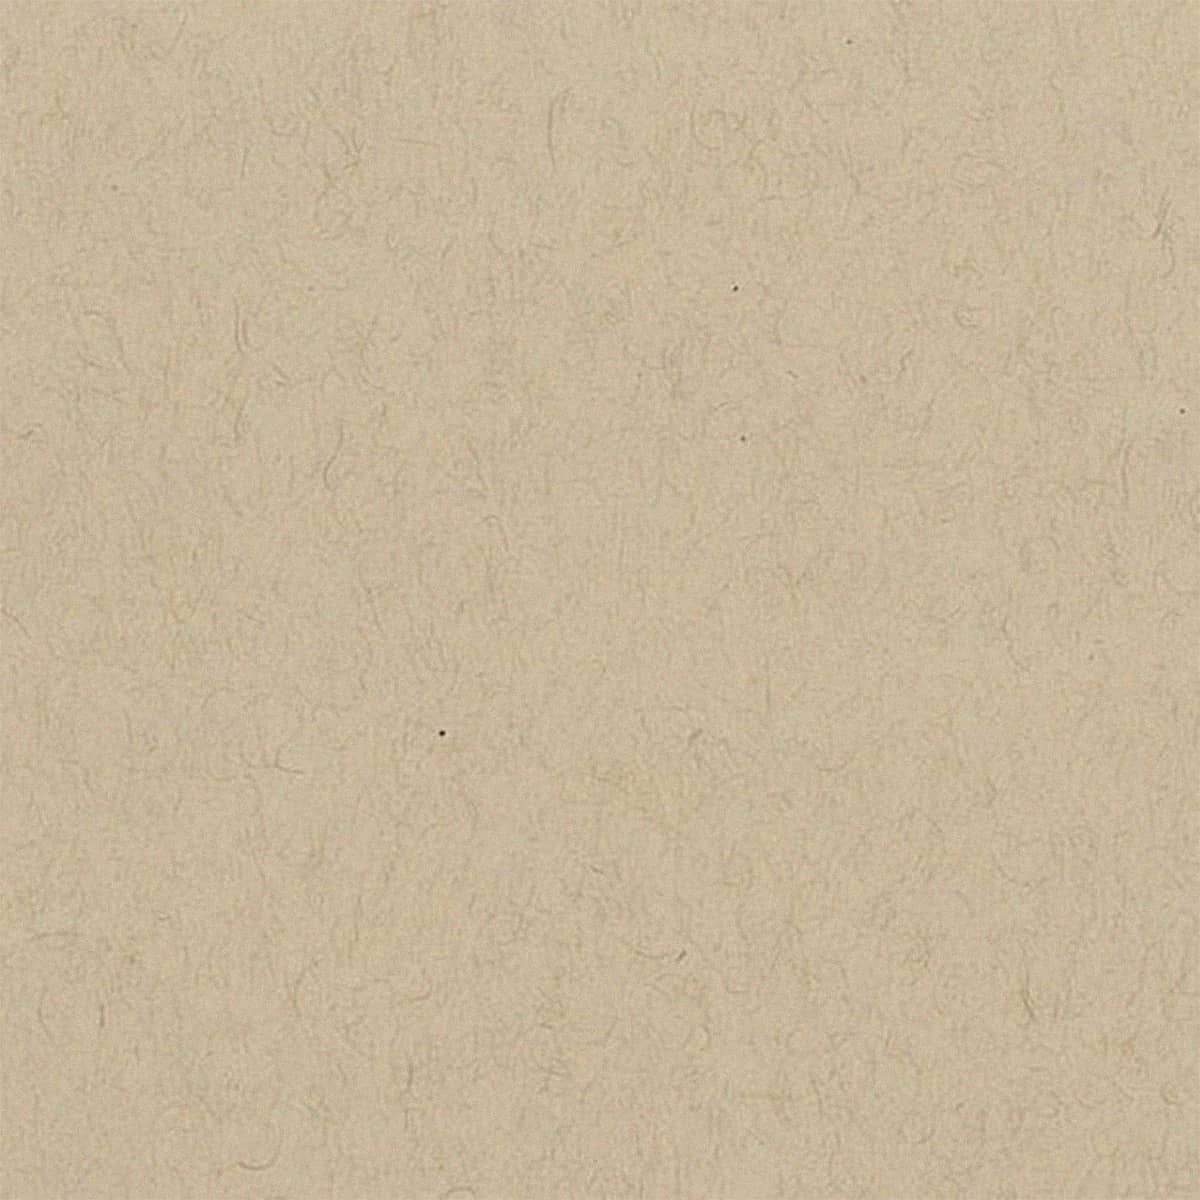 Strathmore 400 Series Recycled Toned Sketch Paper - Tan, 19"x24" (25-Sheets)